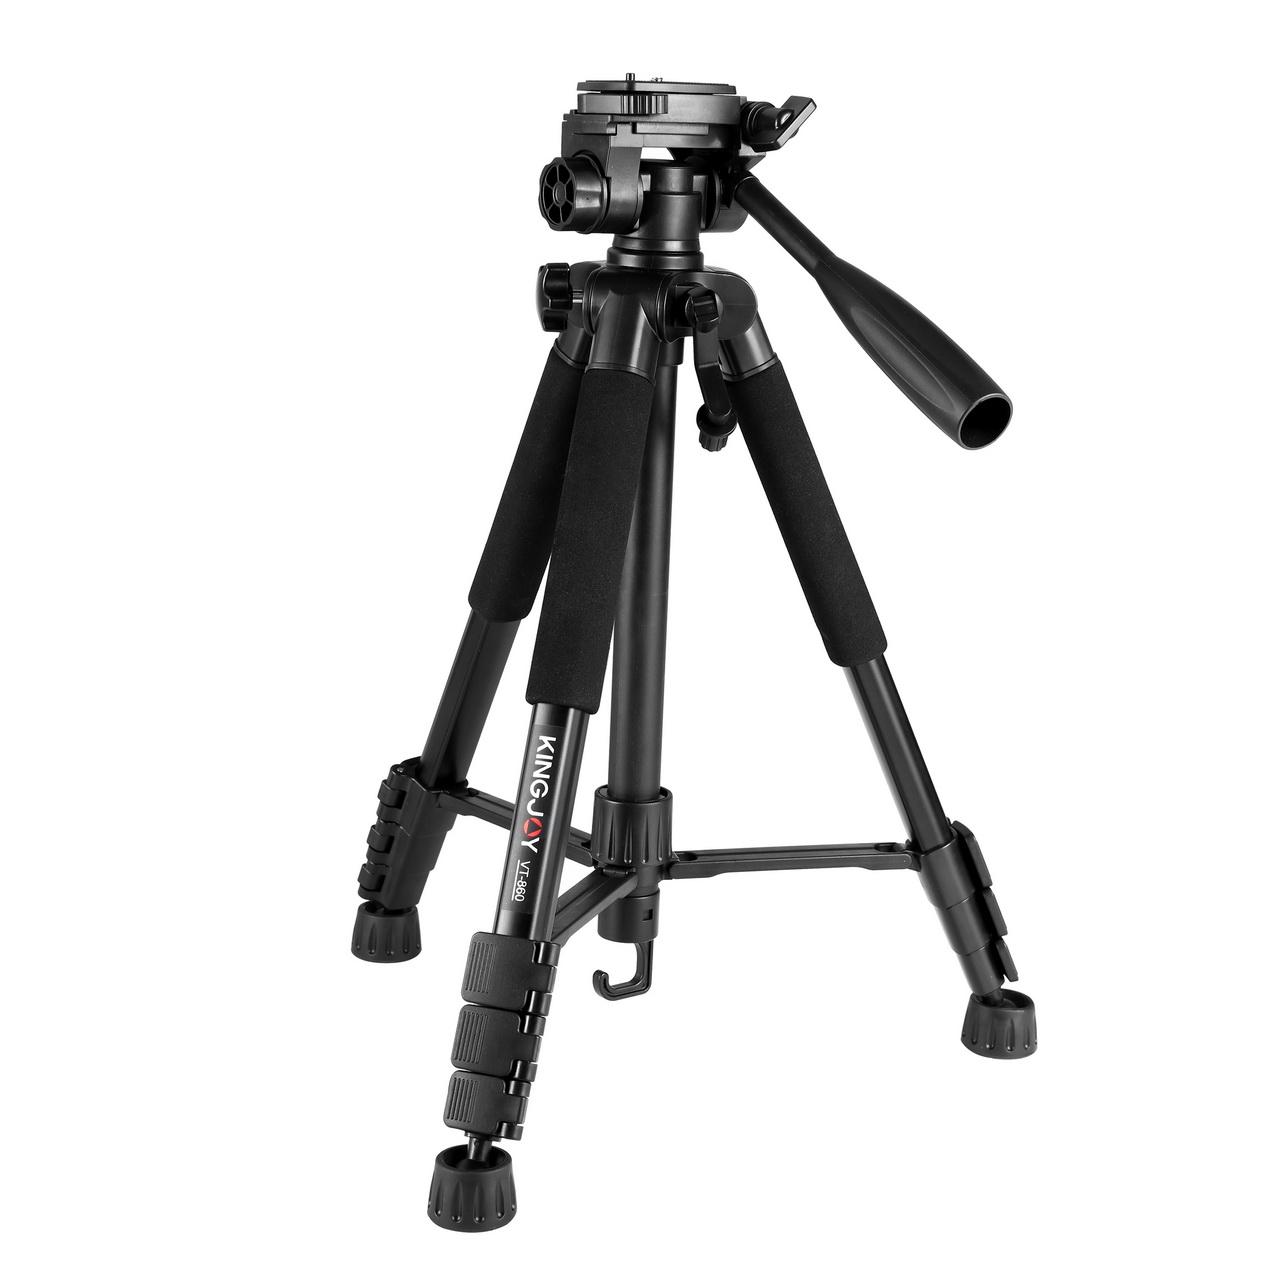 Travel Camera Tripod Kit, Lightweight Aluminum Tripods with Fluid Head for Photography Video Shooting, YouTube Videos, Live Webcasts